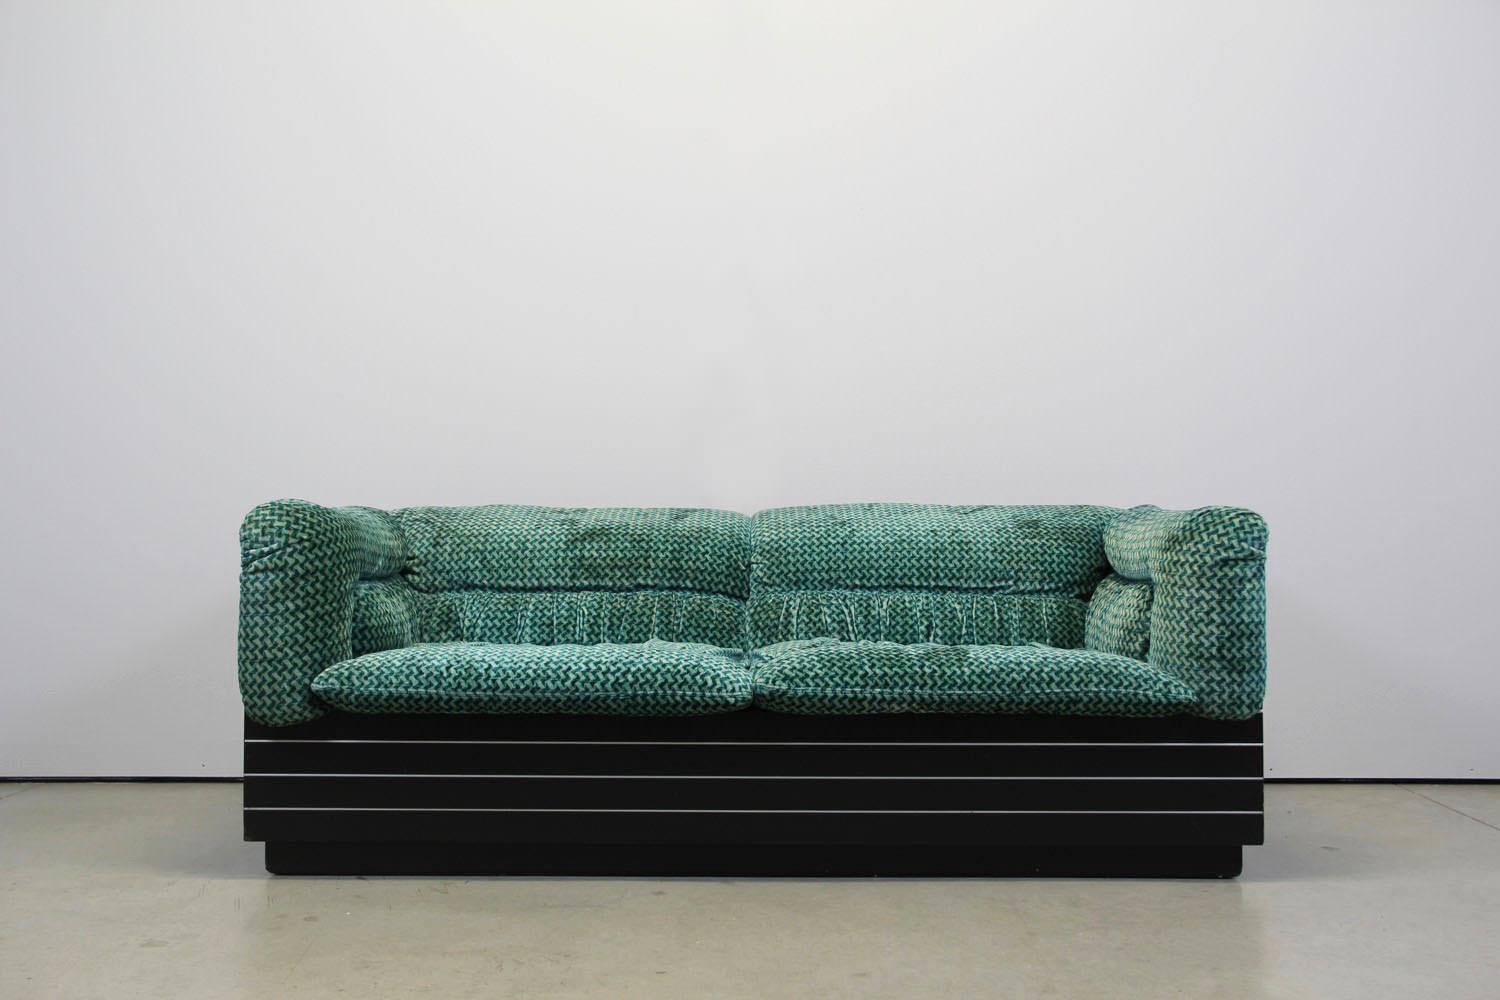 This living room set is manufactured by Saporiti Italia in the 1970s.
It consist a 3-seat sofa and a 2-seat sofa including 1 coffee table.
The fabric is like emerald green.
The black frame from the sofa and table is made of black lacquered wood